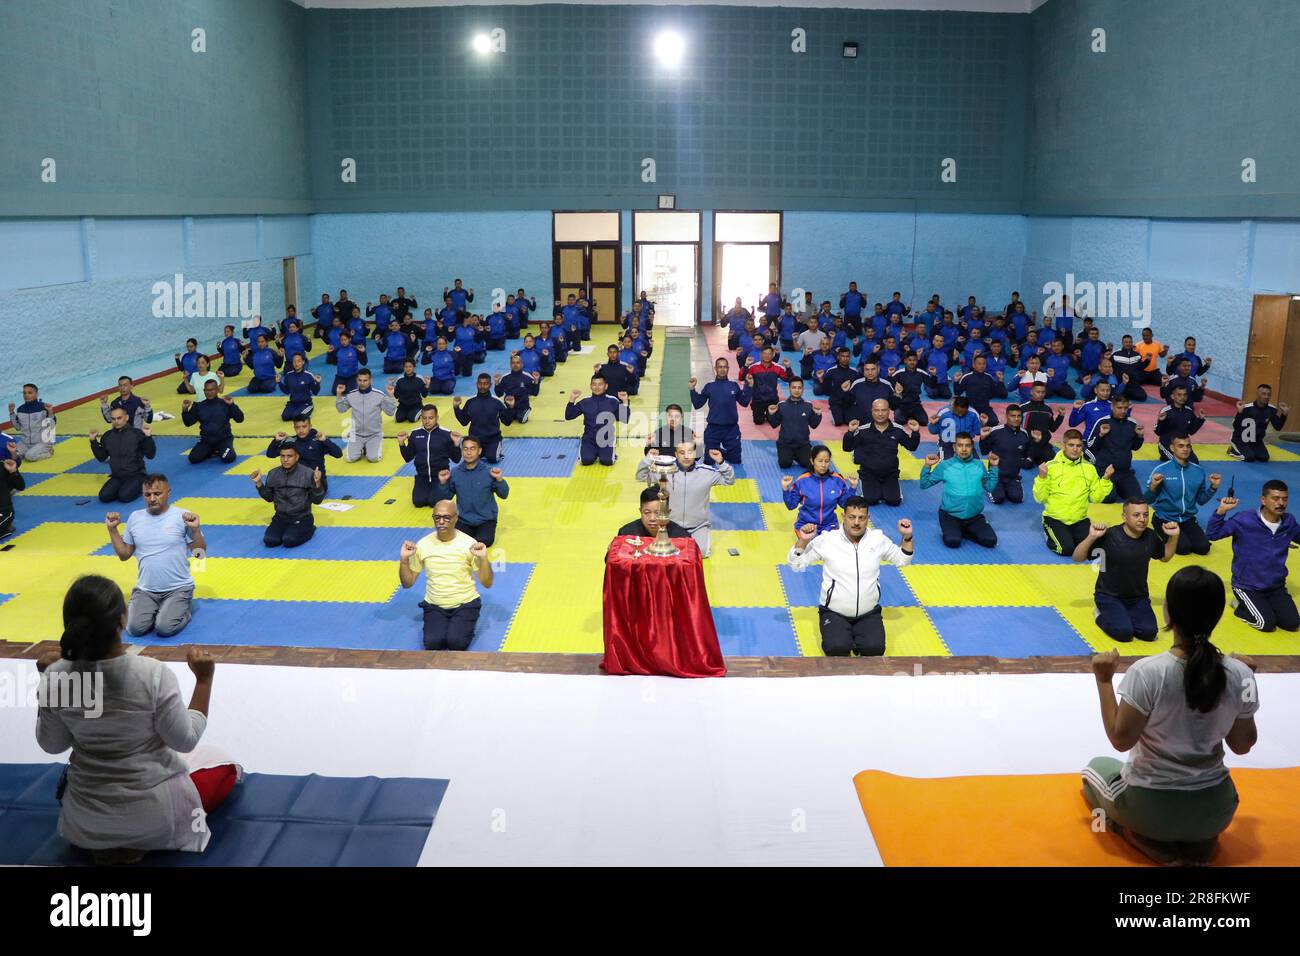 https://c8.alamy.com/comp/2R8FKWF/on-june-21-2023-in-kathmandu-nepal-members-of-the-nepal-police-perform-yoga-postures-while-taking-part-in-a-session-during-international-yoga-day-at-the-national-police-academy-headquarters-international-yoga-day-has-been-celebrated-every-year-on-june-21-since-2015-hundreds-of-millions-of-people-worldwide-perform-yoga-to-mark-the-day-this-years-international-yoga-day-was-celebrated-with-the-theme-of-yoga-for-vasudhaiva-kutumbakam-which-perfectly-captures-our-shared-desire-for-one-earth-one-family-and-one-future-the-main-aim-of-yoga-day-is-to-raise-awareness-about-the-n-2R8FKWF.jpg